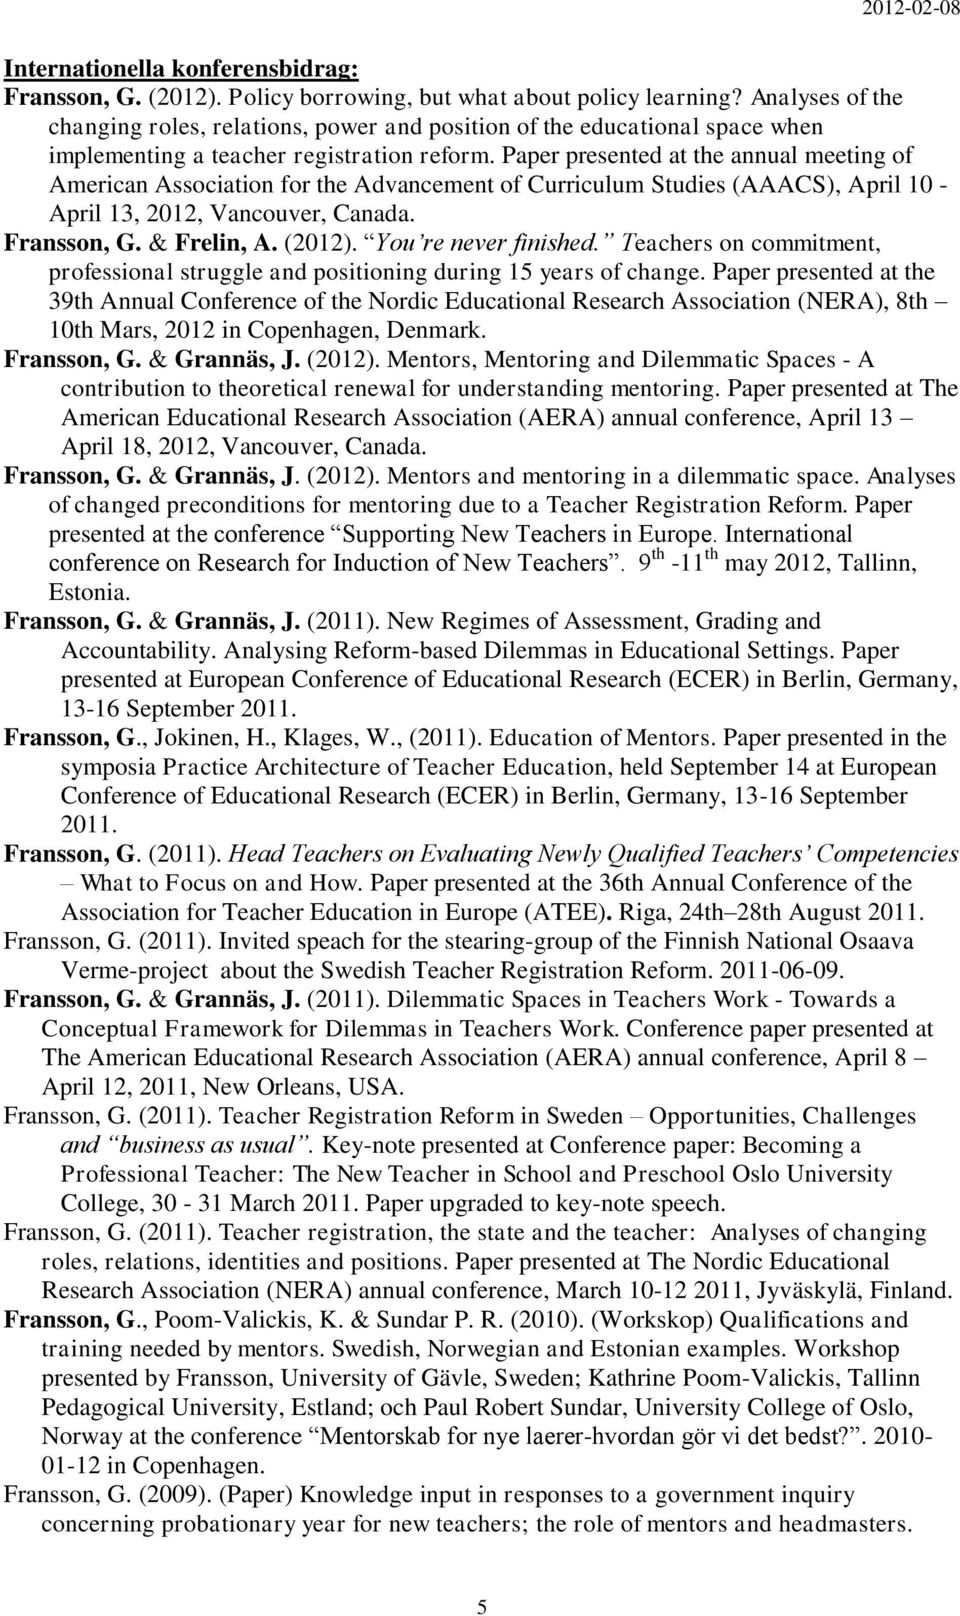 Paper presented at the annual meeting of American Association for the Advancement of Curriculum Studies (AAACS), April 10 - April 13, 2012, Vancouver, Canada. Fransson, G. & Frelin, A. (2012).